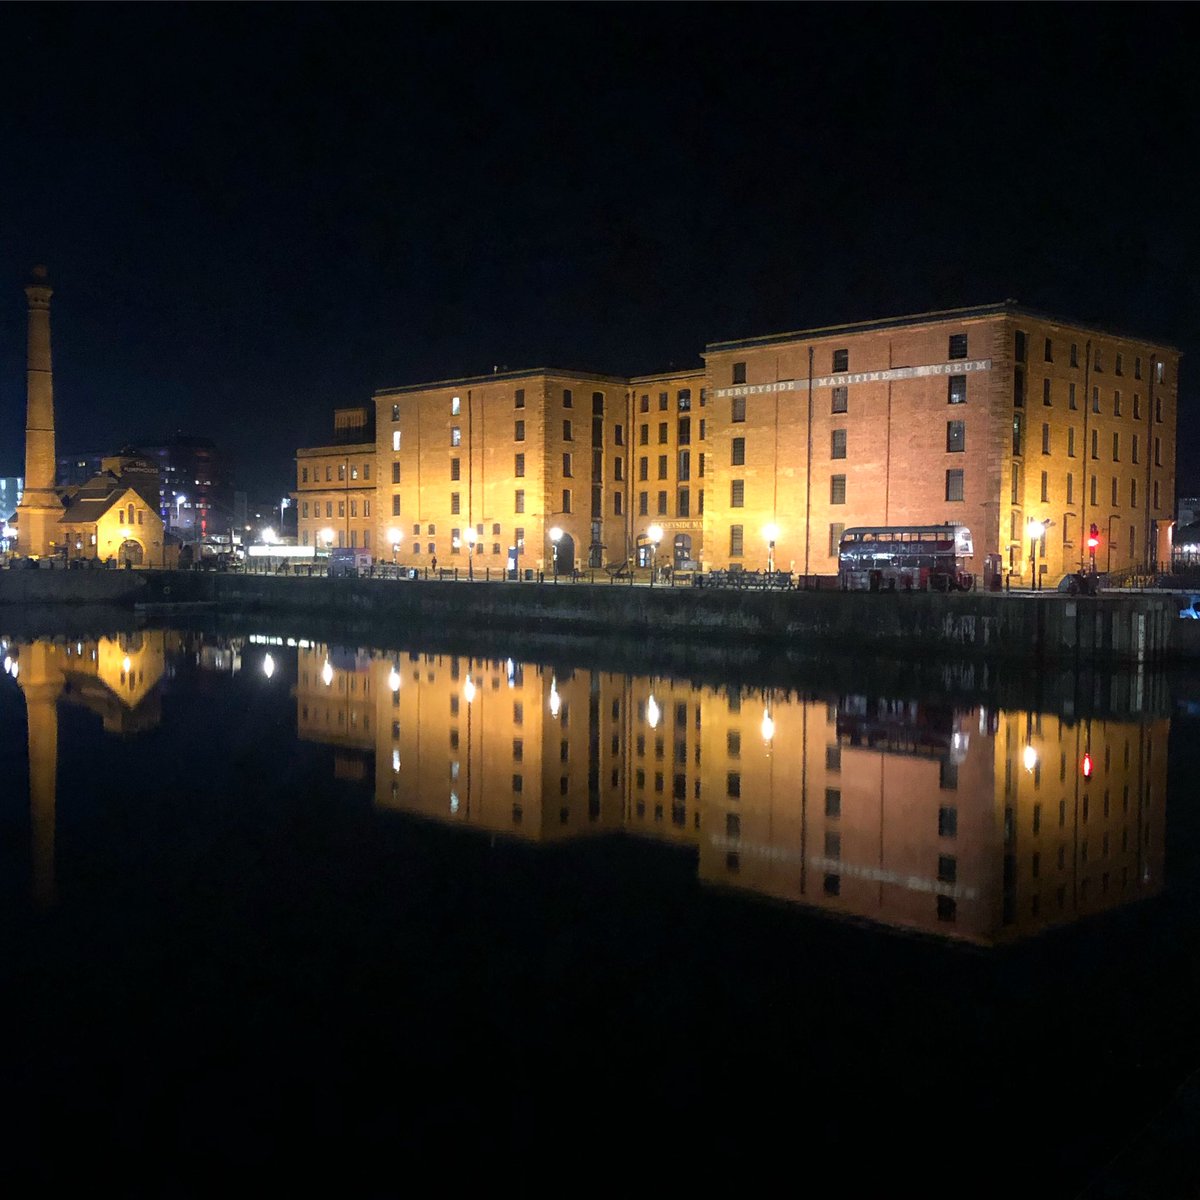 I can’t think of a prettier place to complete my Daily Mile @_thedailymile @theAlbertDock @tateliverpool @MerseyMaritime @Elaine_Wyllie #Reflection #Peace #Beauty